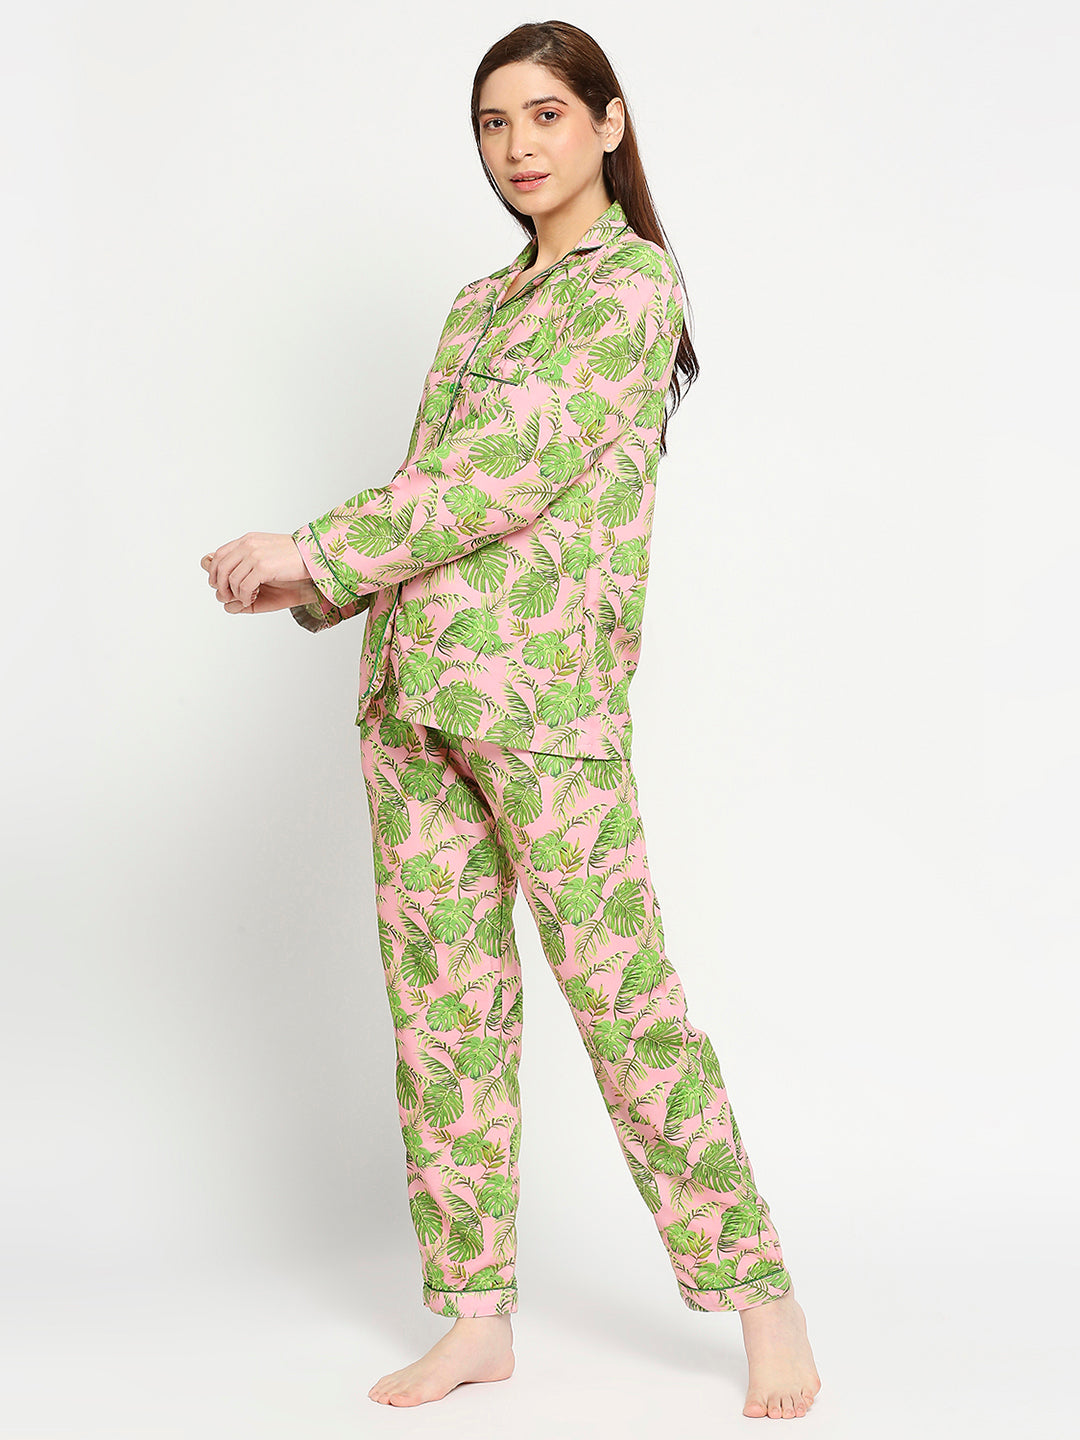 Exotica Button Down Pj Set - Cotton Rayon Pj Set with Notched Collar